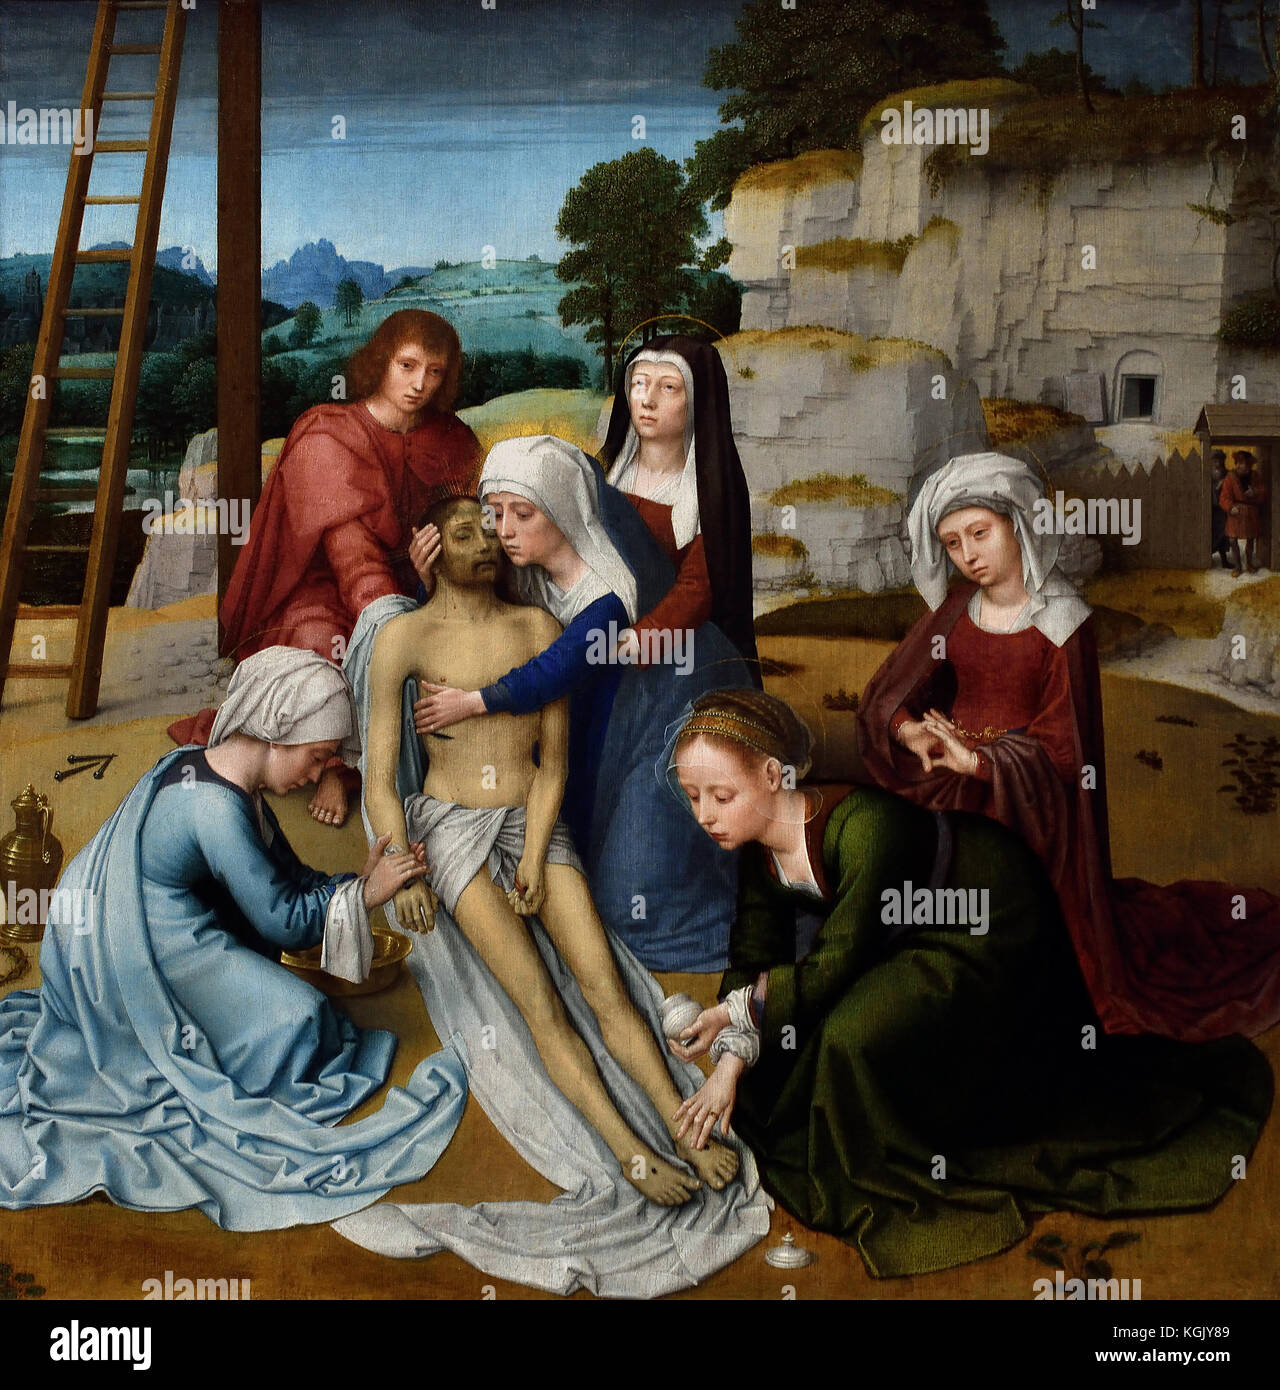 Lamentation from Two Panels from an Altarpiece 1515-1523 Gerard David  1460 – 1523 Early Netherlandish painter and manuscript illuminator known for his brilliant use of color ( The Netherlands, Dutch, Belgian, Belgium, Flemish ) Stock Photo